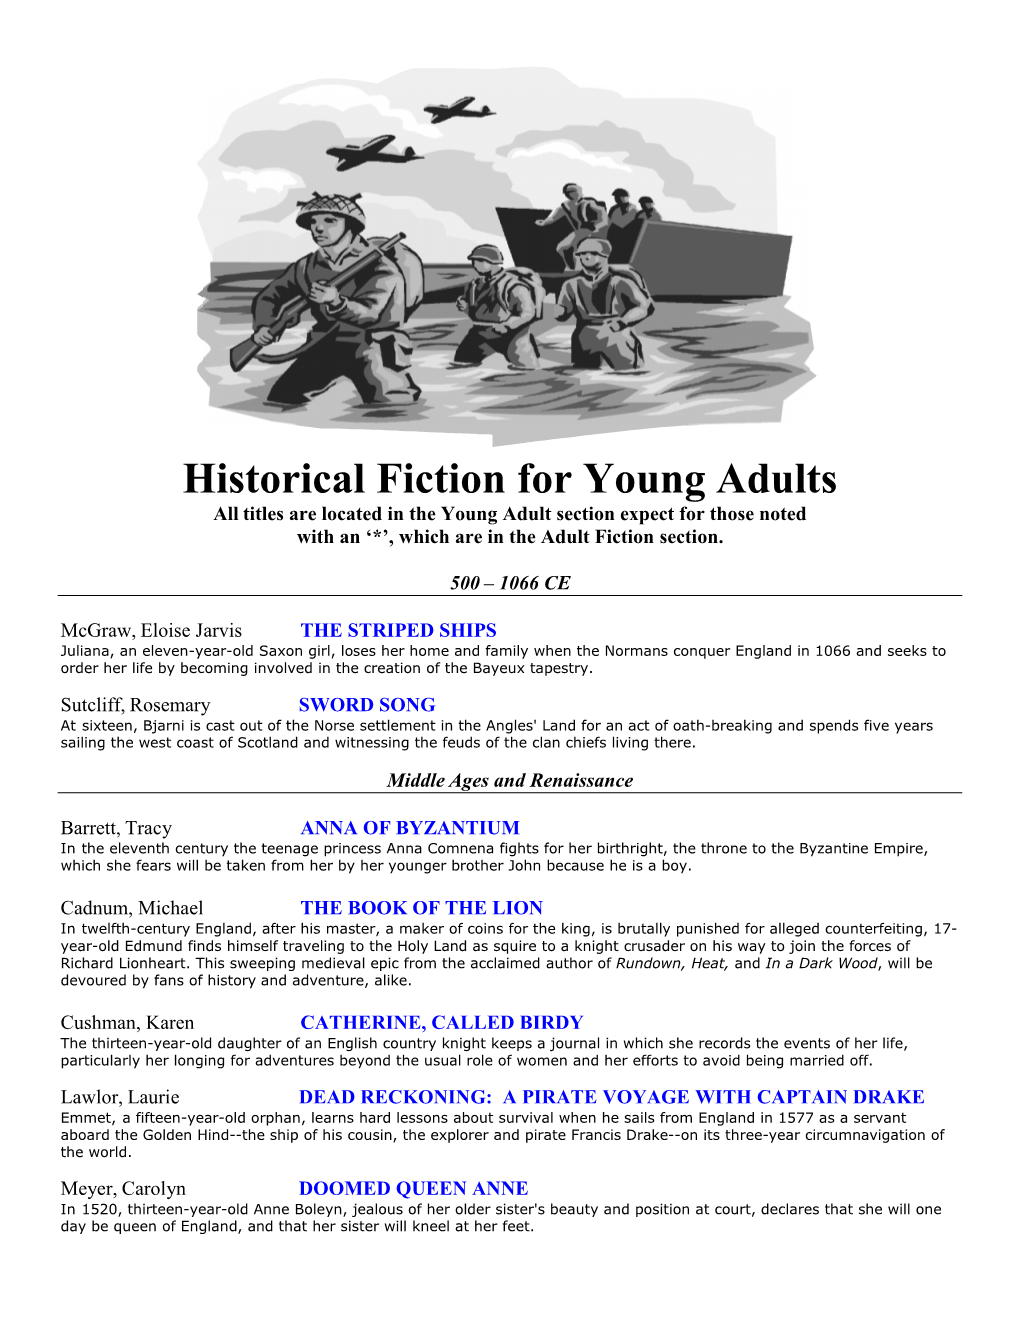 Historical Fiction for Young Adults All Titles Are Located in the Young Adult Section Expect for Those Noted with an ‘*’, Which Are in the Adult Fiction Section